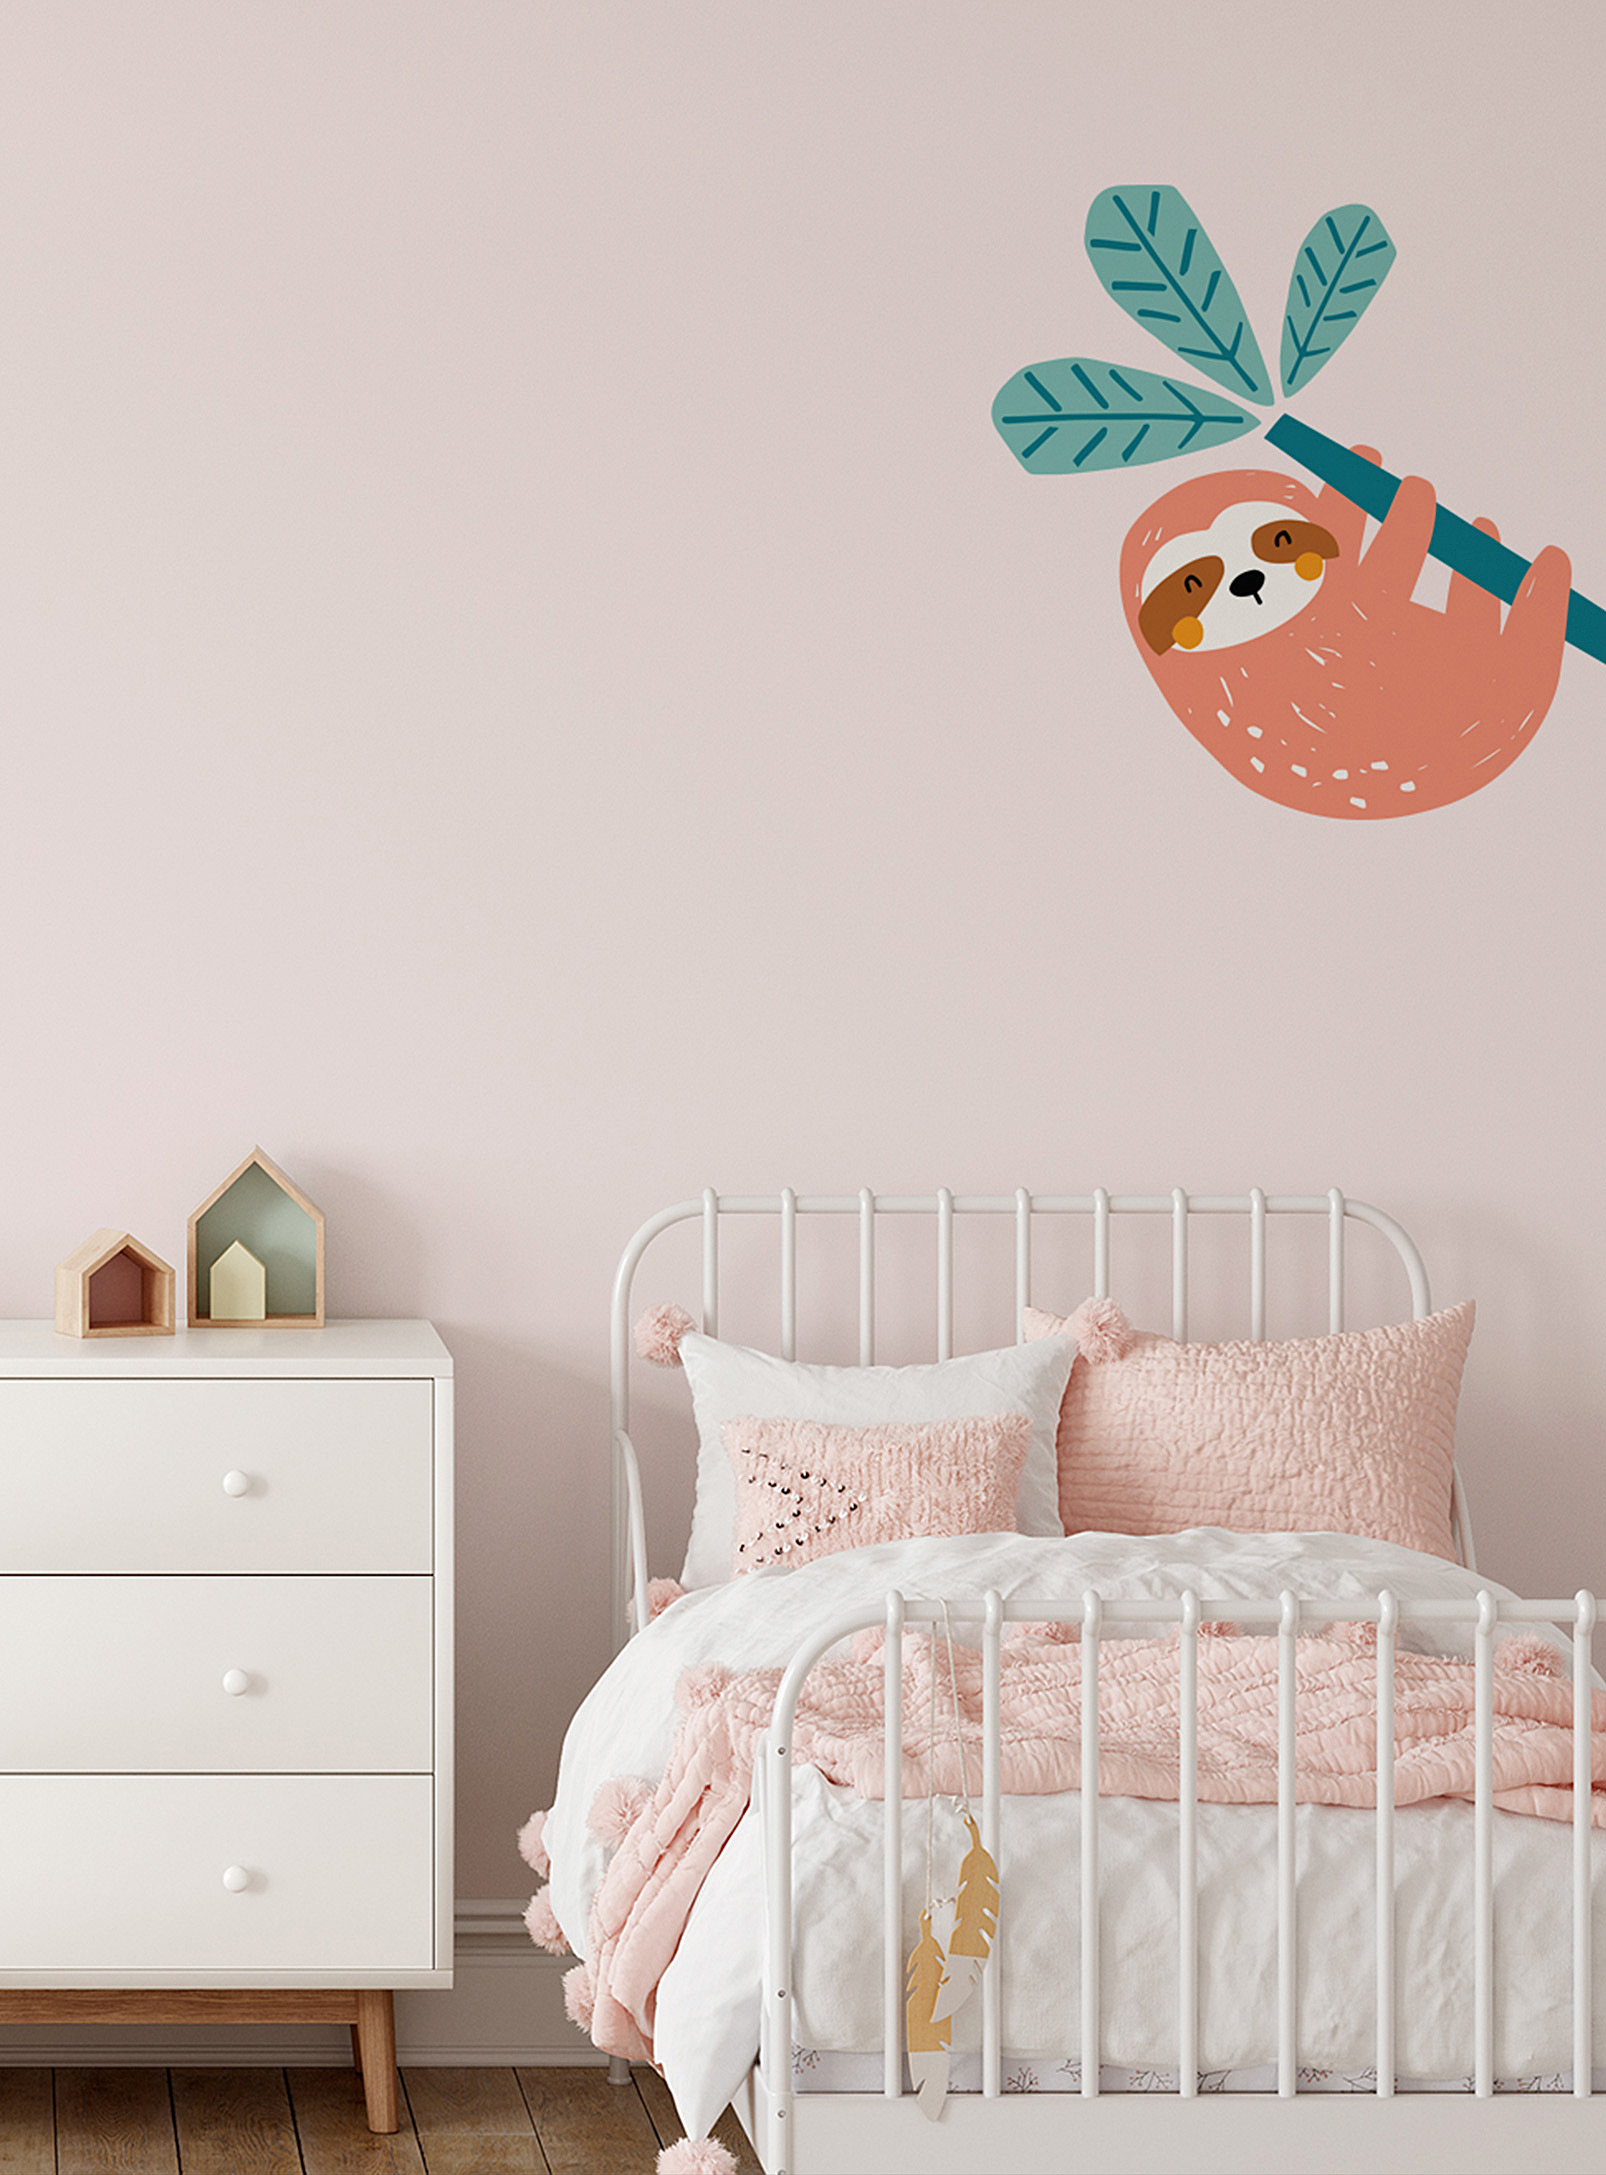 Meraki Vie De Pacha Wall Decals In Collaboration With Artist Marie-france Auger In Coral